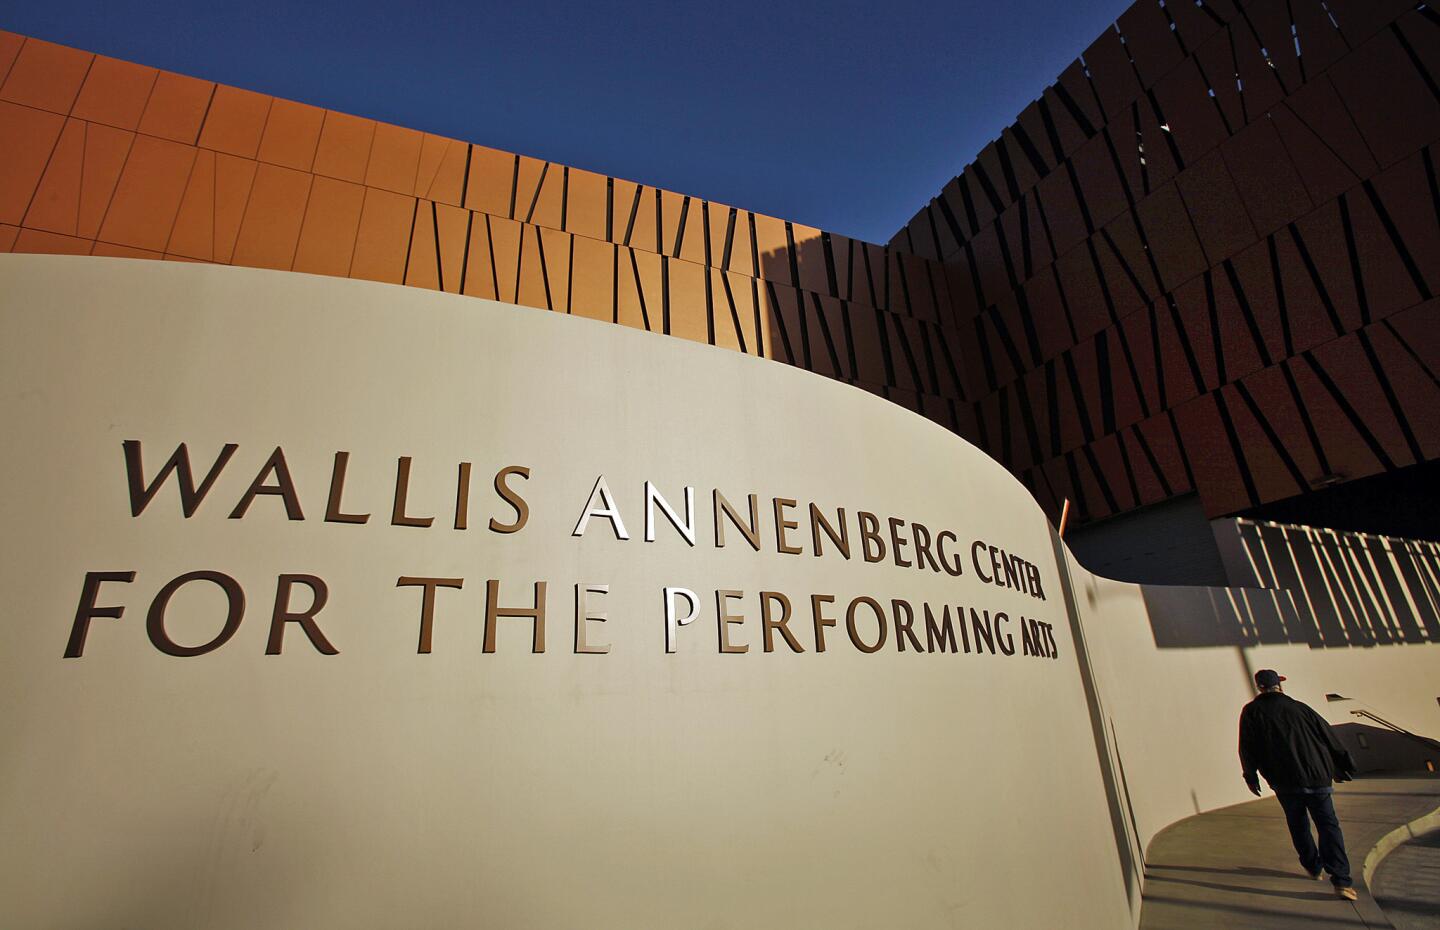 Wallis Annenberg Center For the Performing Arts